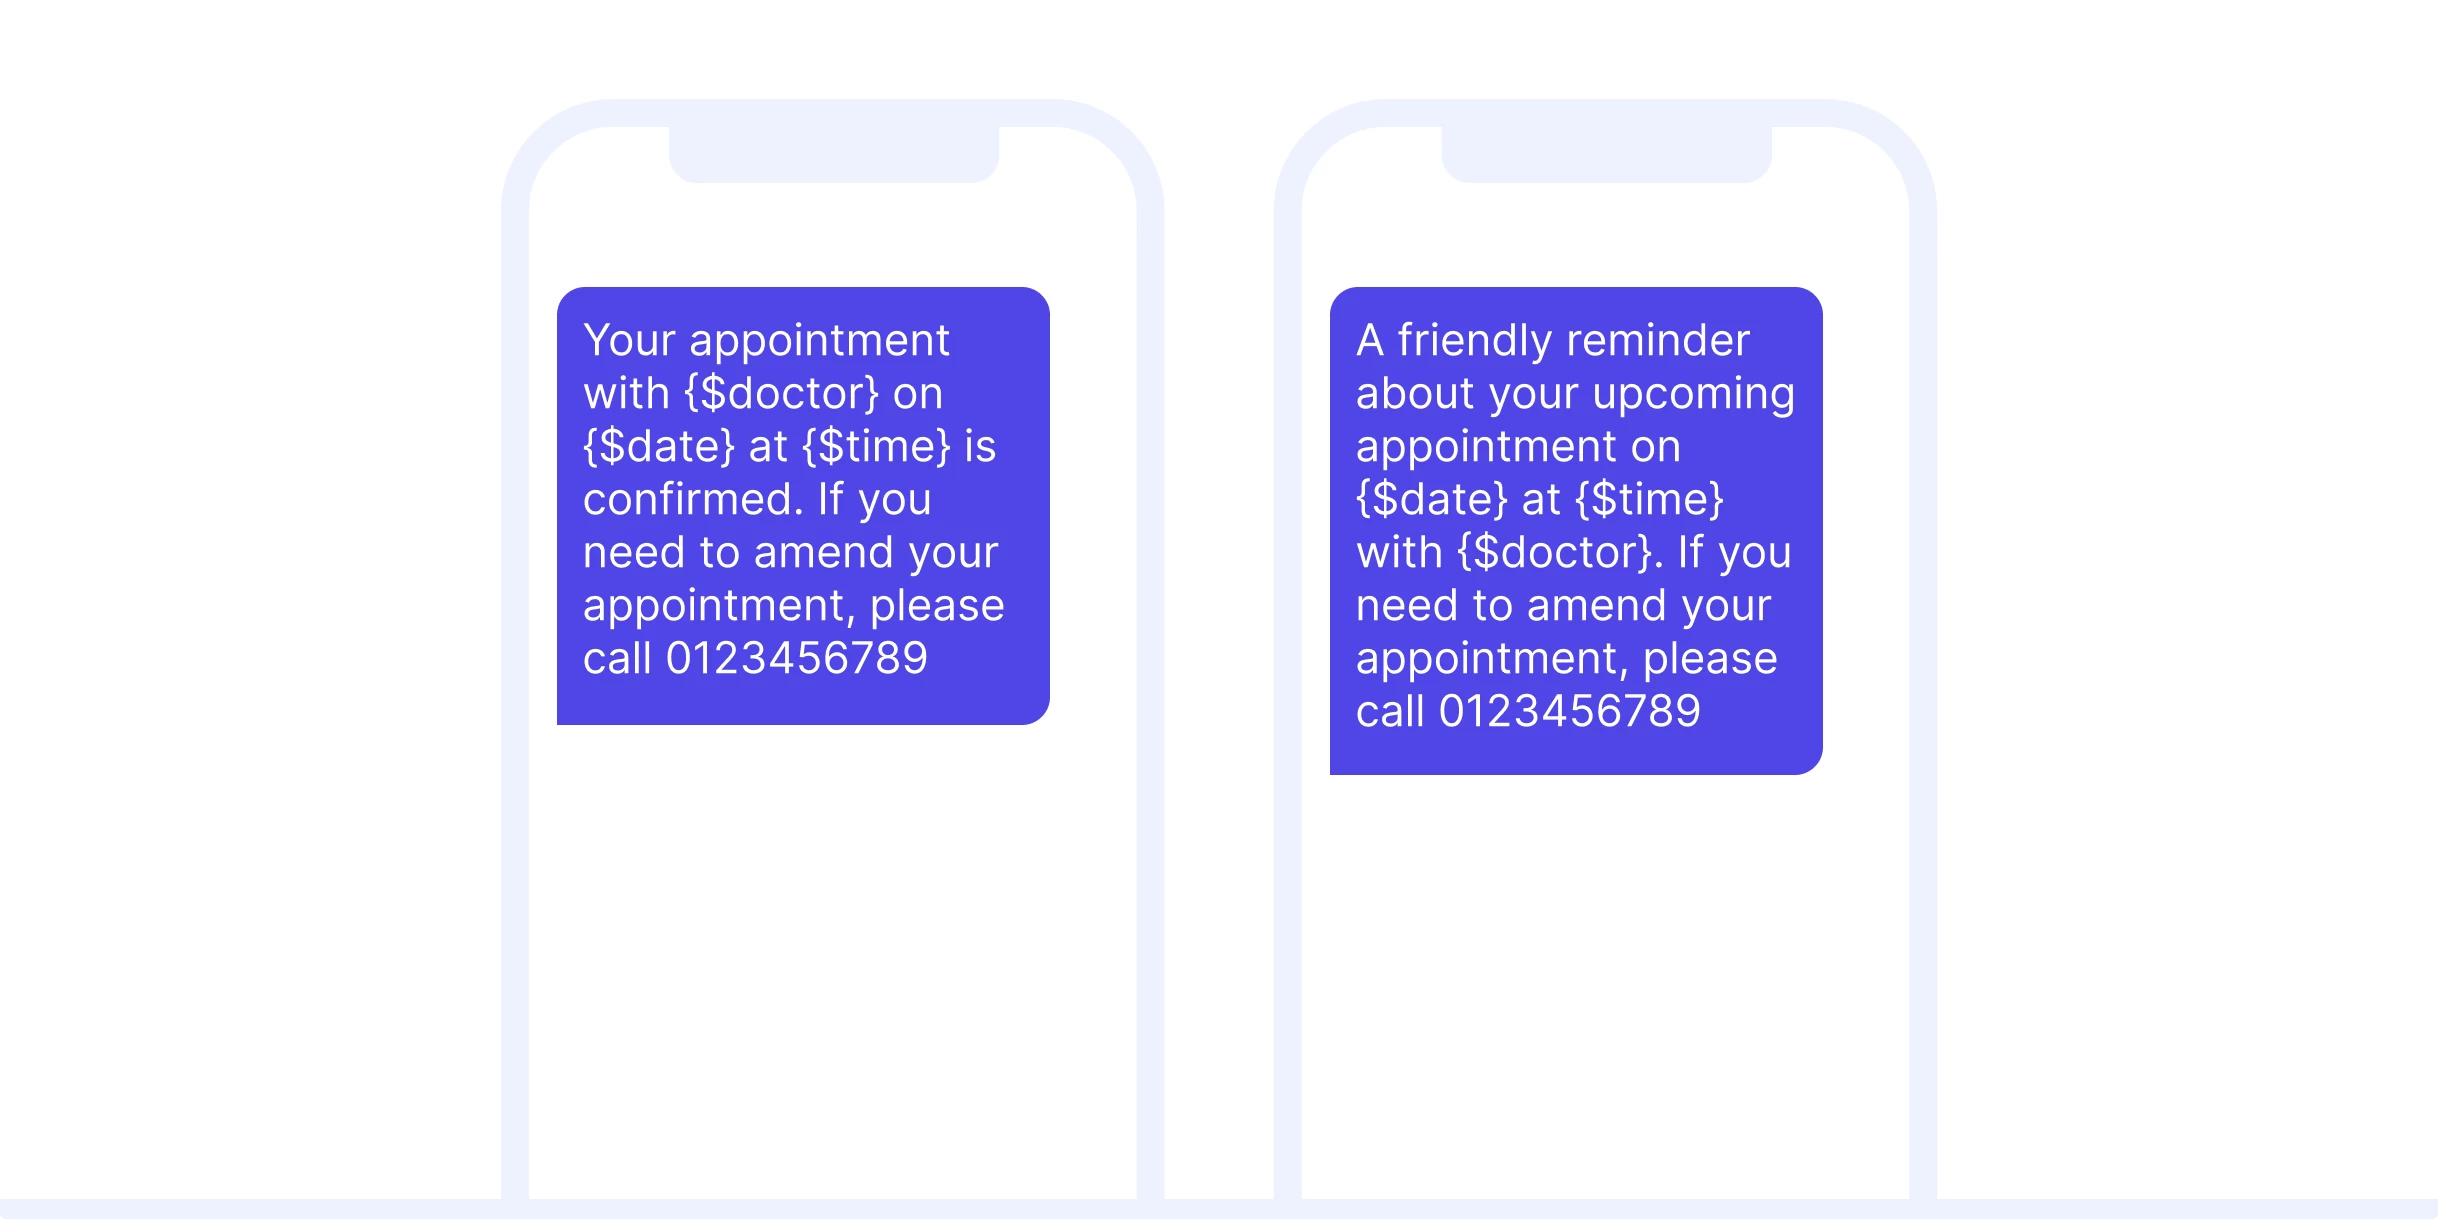 Transactional SMS examples for appointment confirmation and reminder.